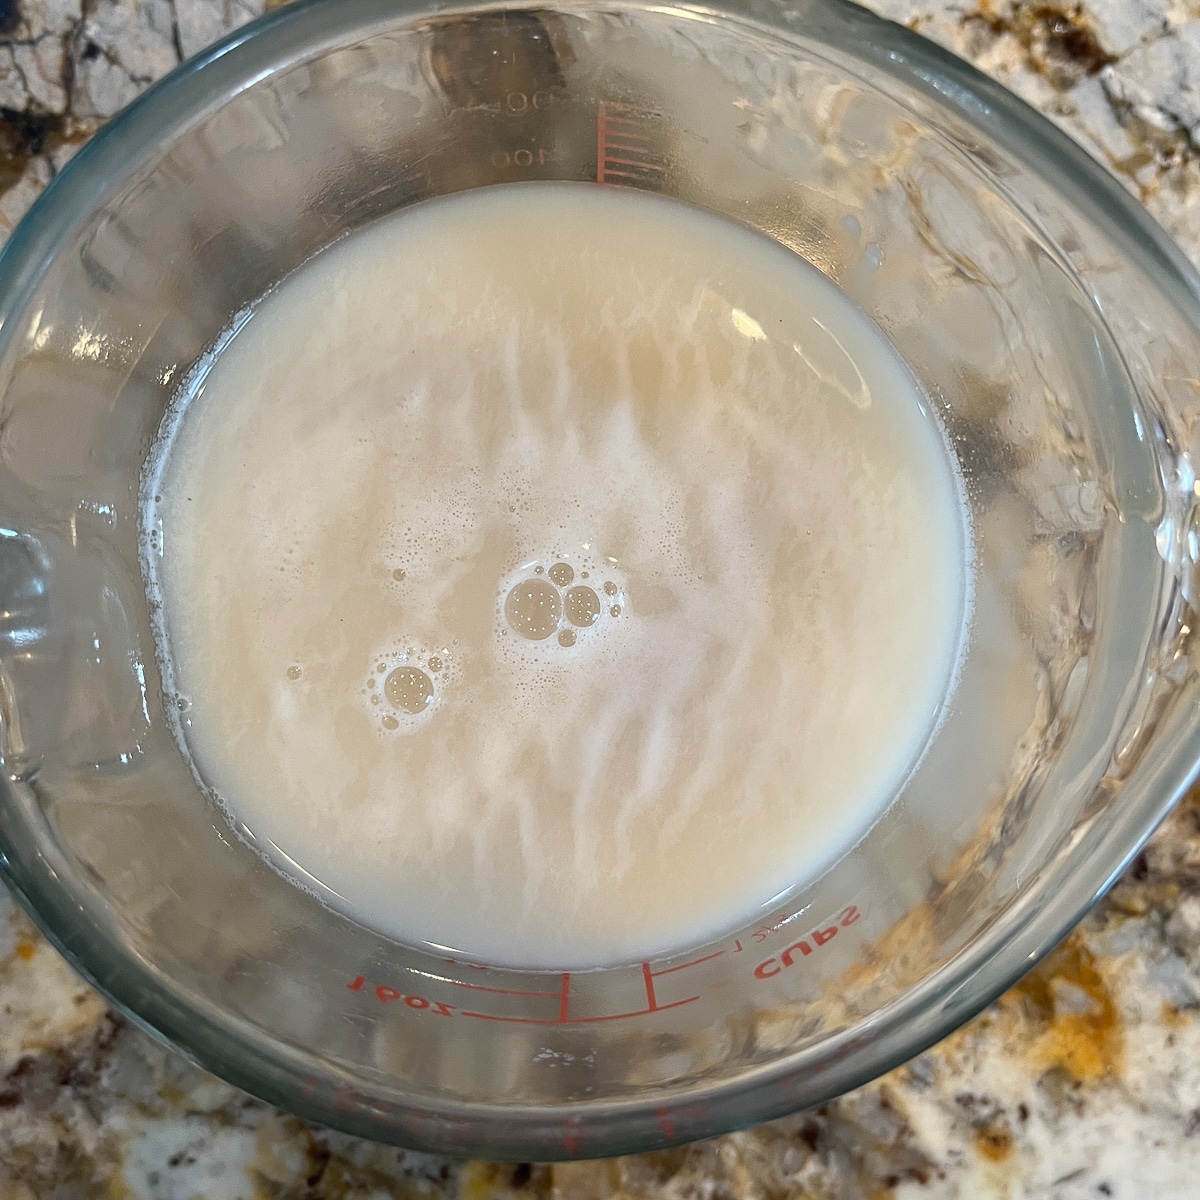 yeast fermenting in measuring cup